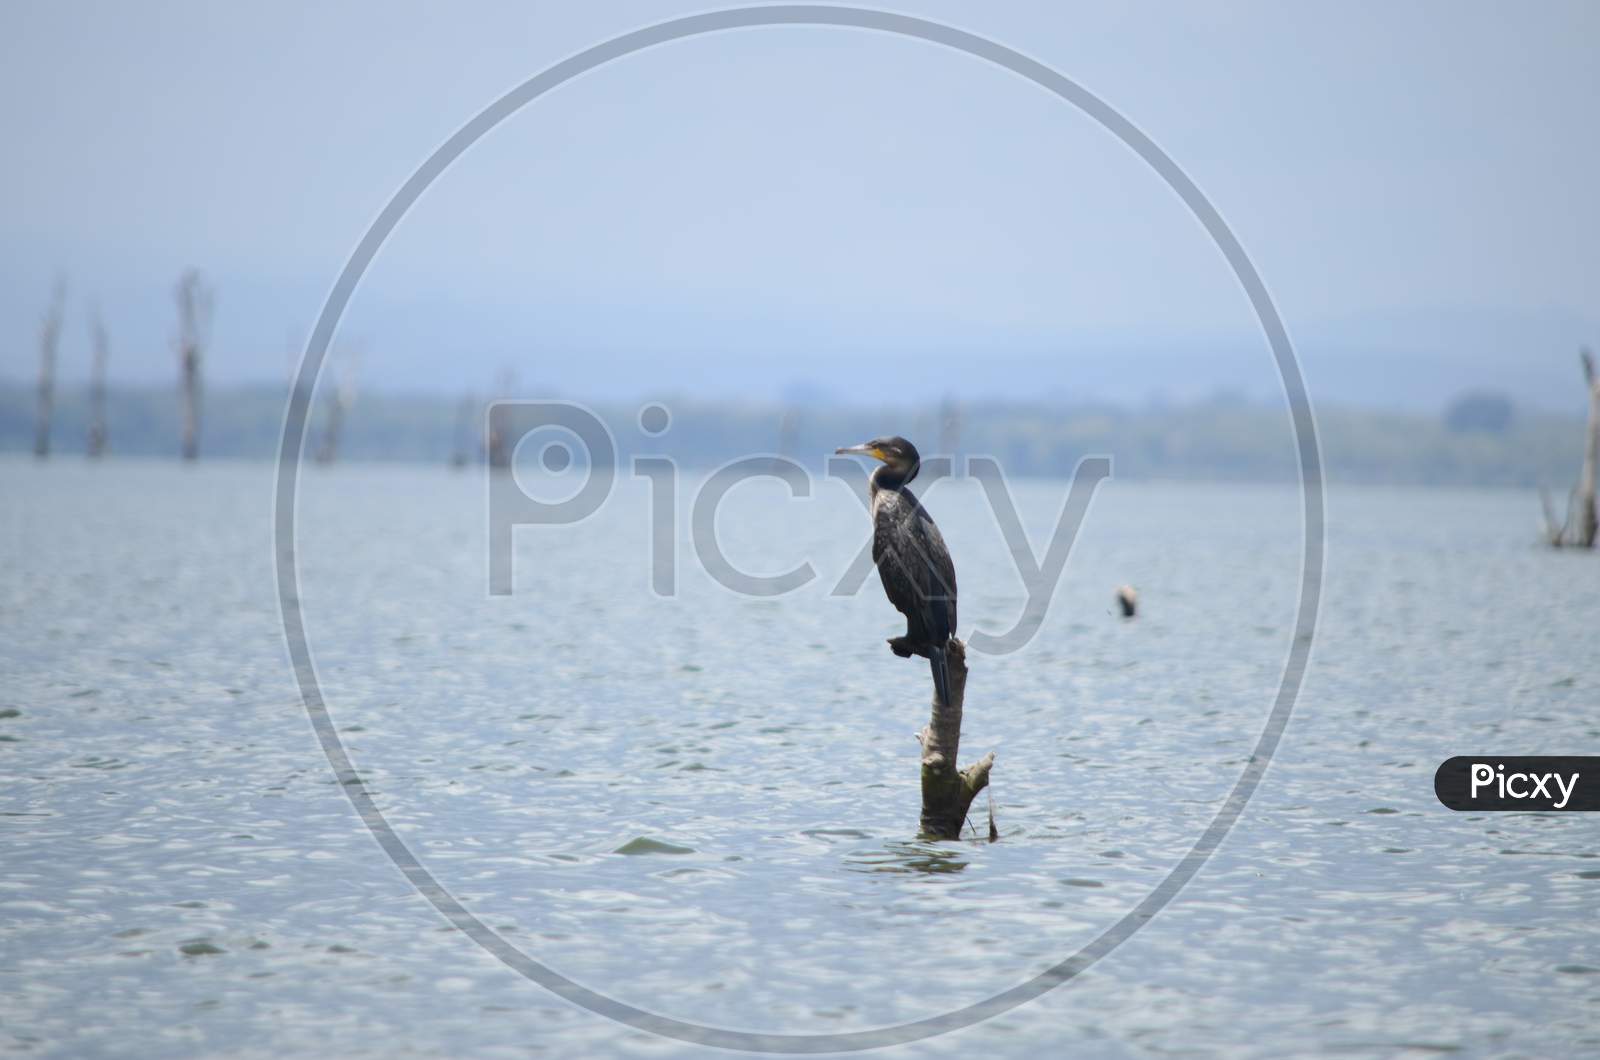 White Breasted Cormorant captured live